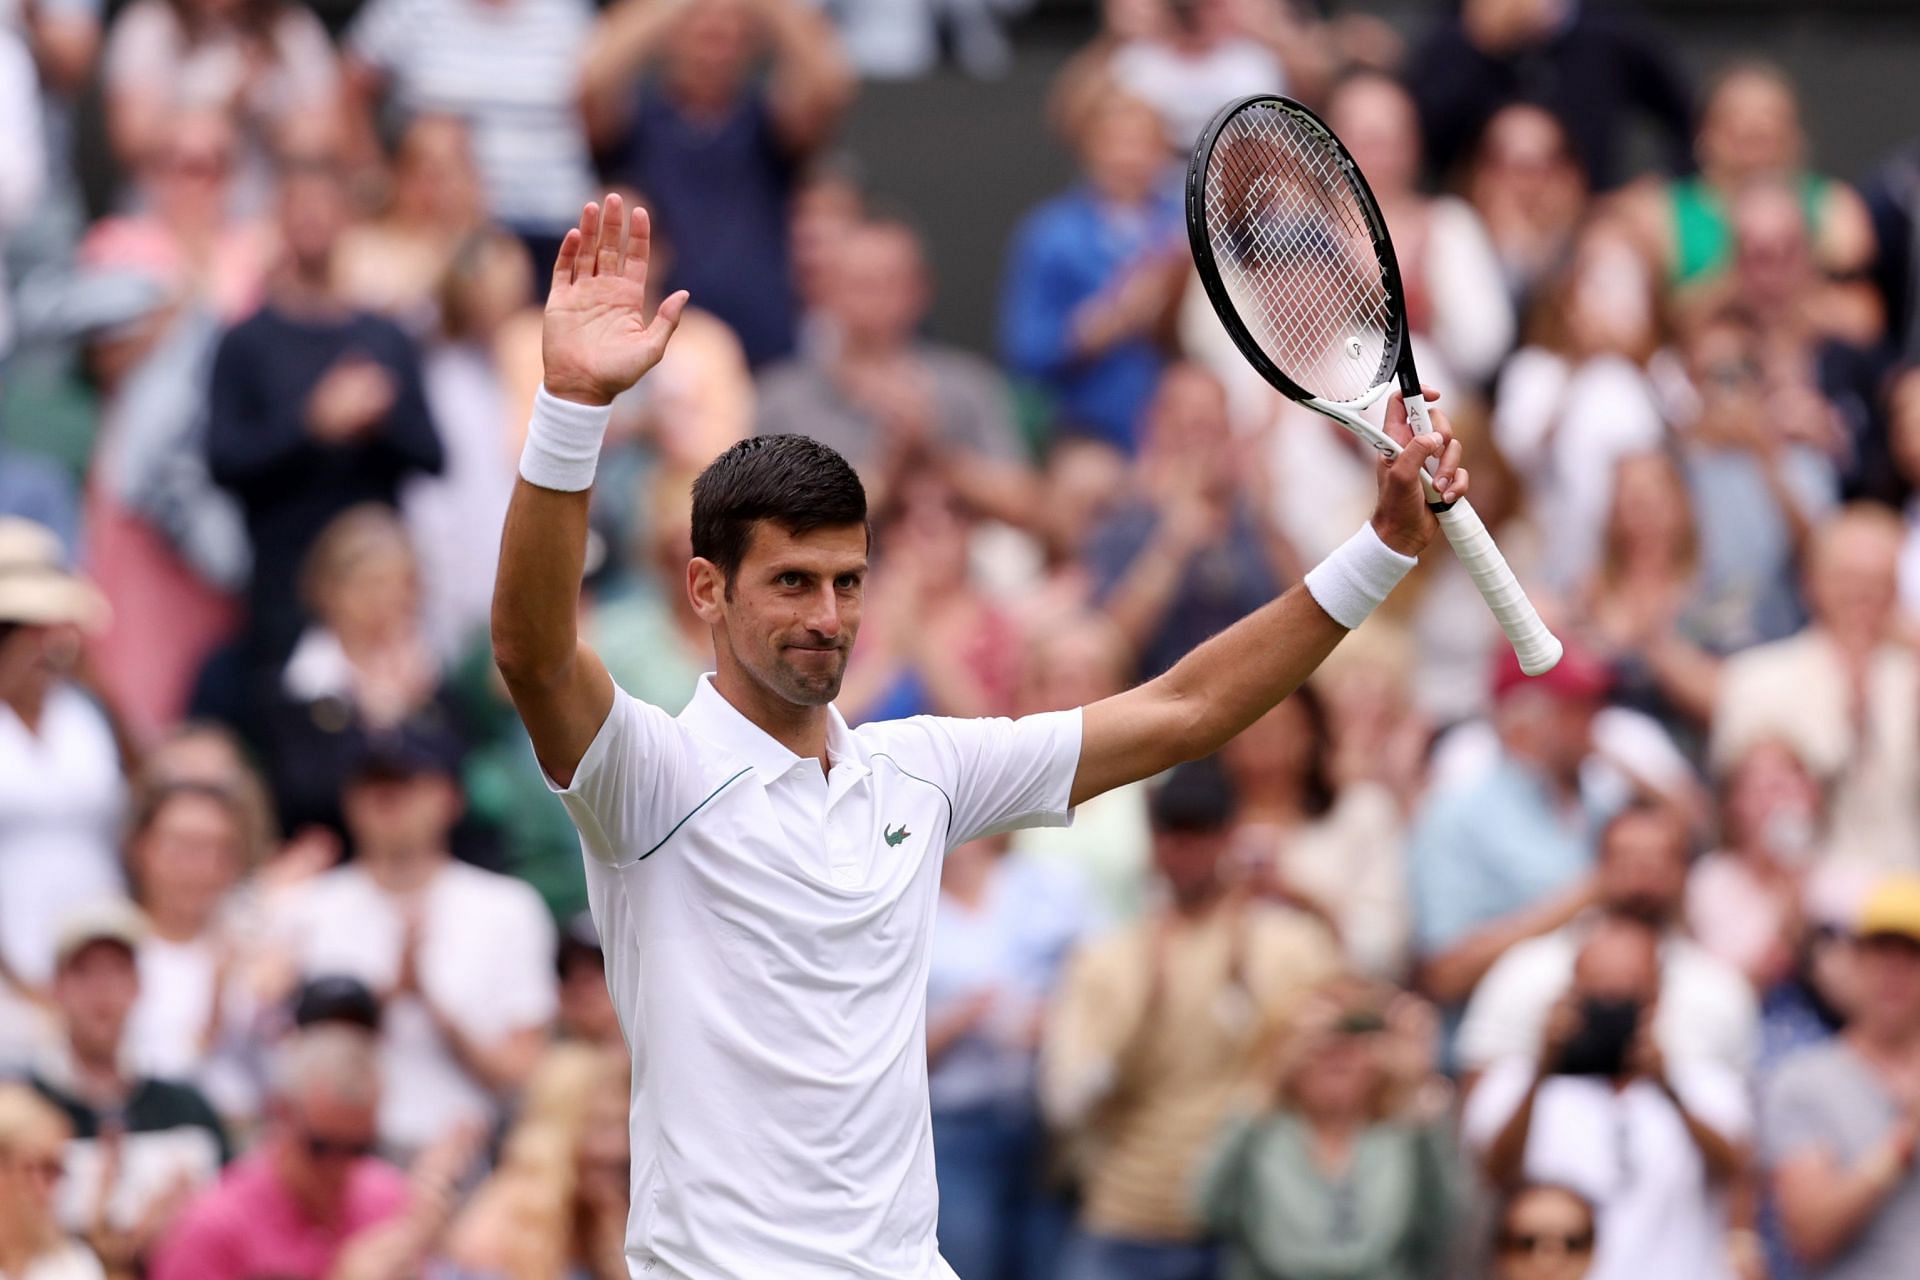 Wimbledon 2022 TV Schedule When are Novak Djokovic, Carlos Alcaraz and Ons Jabeur playing?